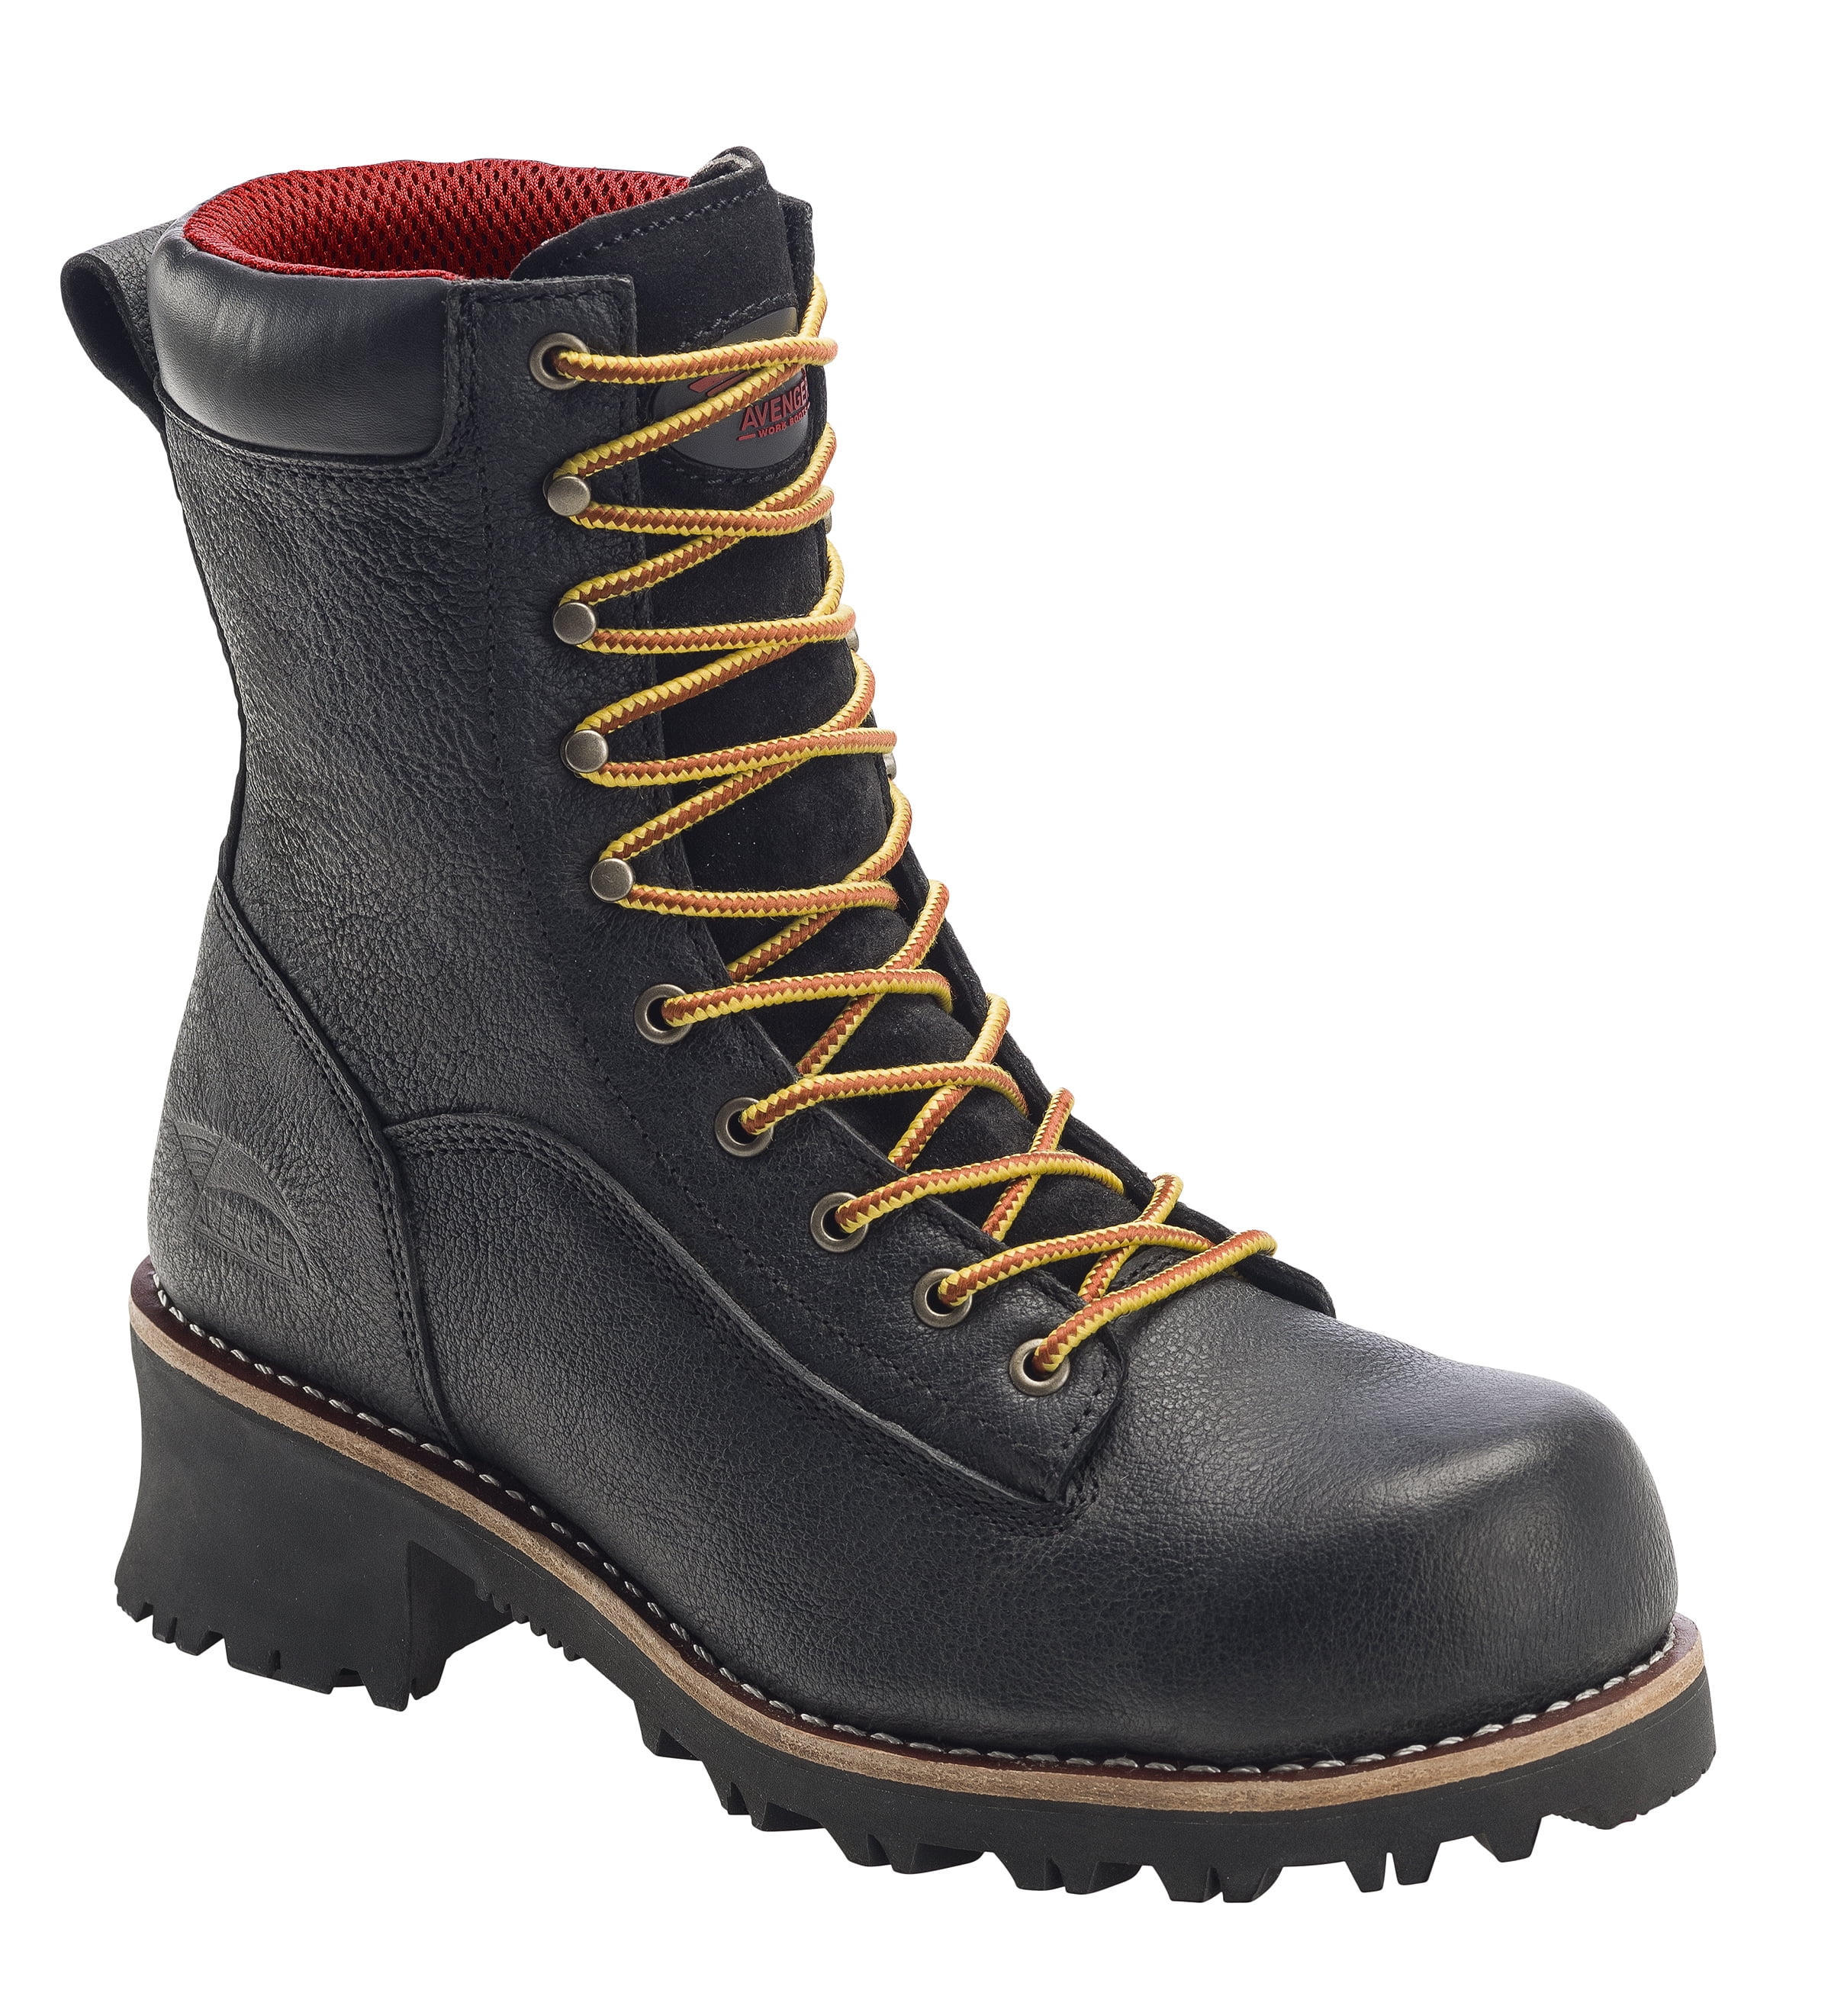 Avenger Work Boots - Leather Composite Toe Puncture Resistant ...